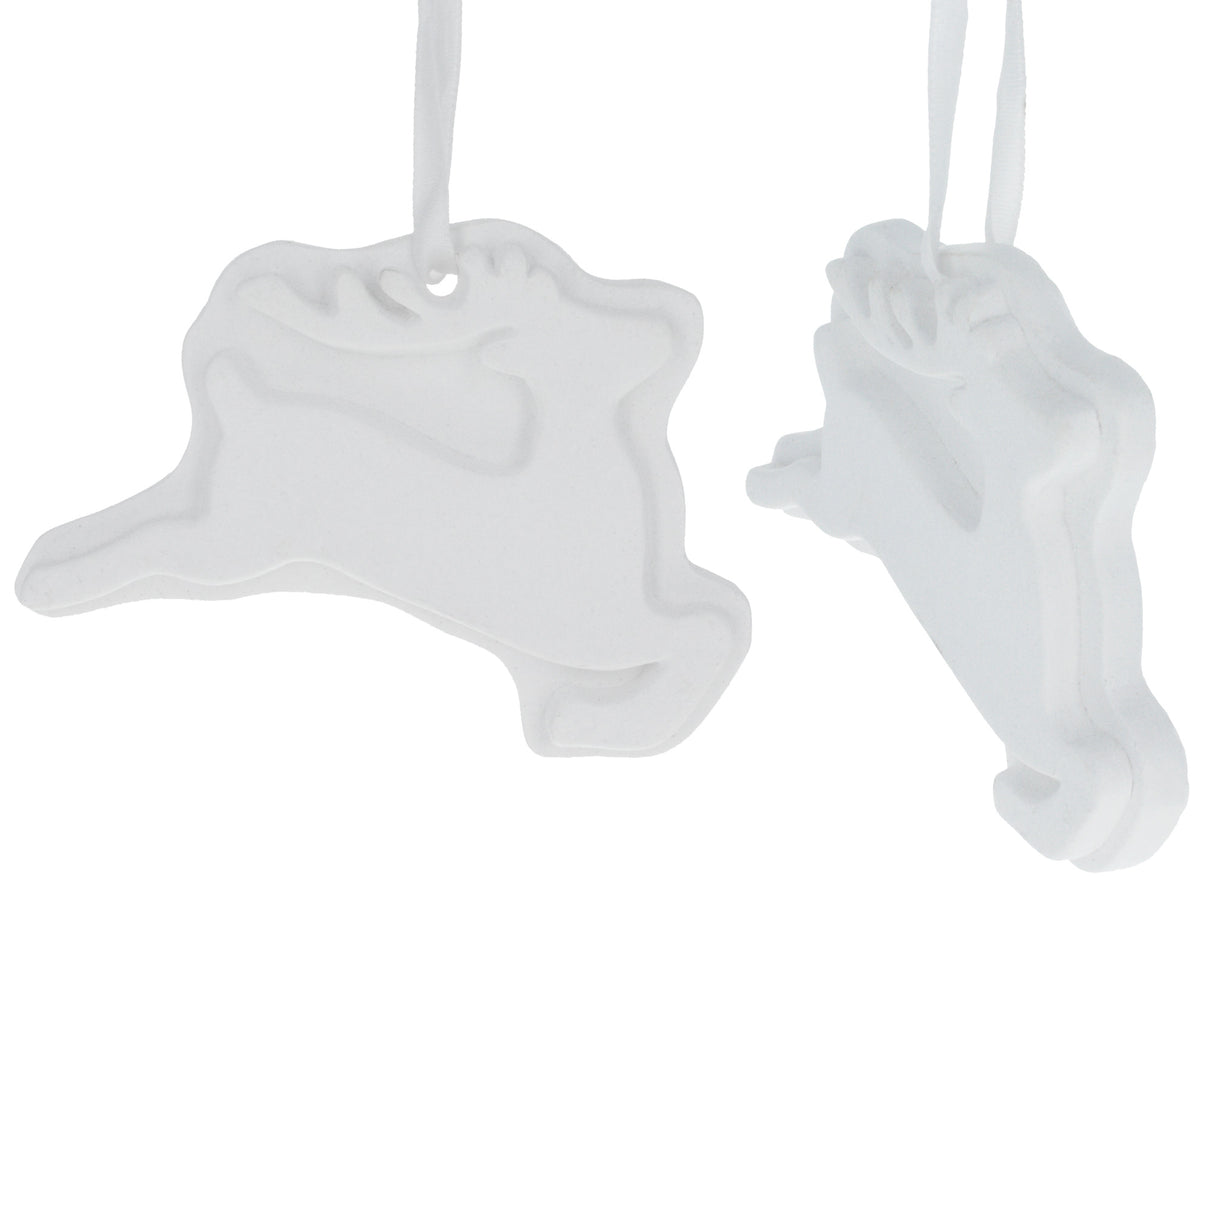 Set of 2 Blank Unfinished White Plaster Reindeer Christmas Ornaments DIY Craft 3.7 Inches in White color,  shape